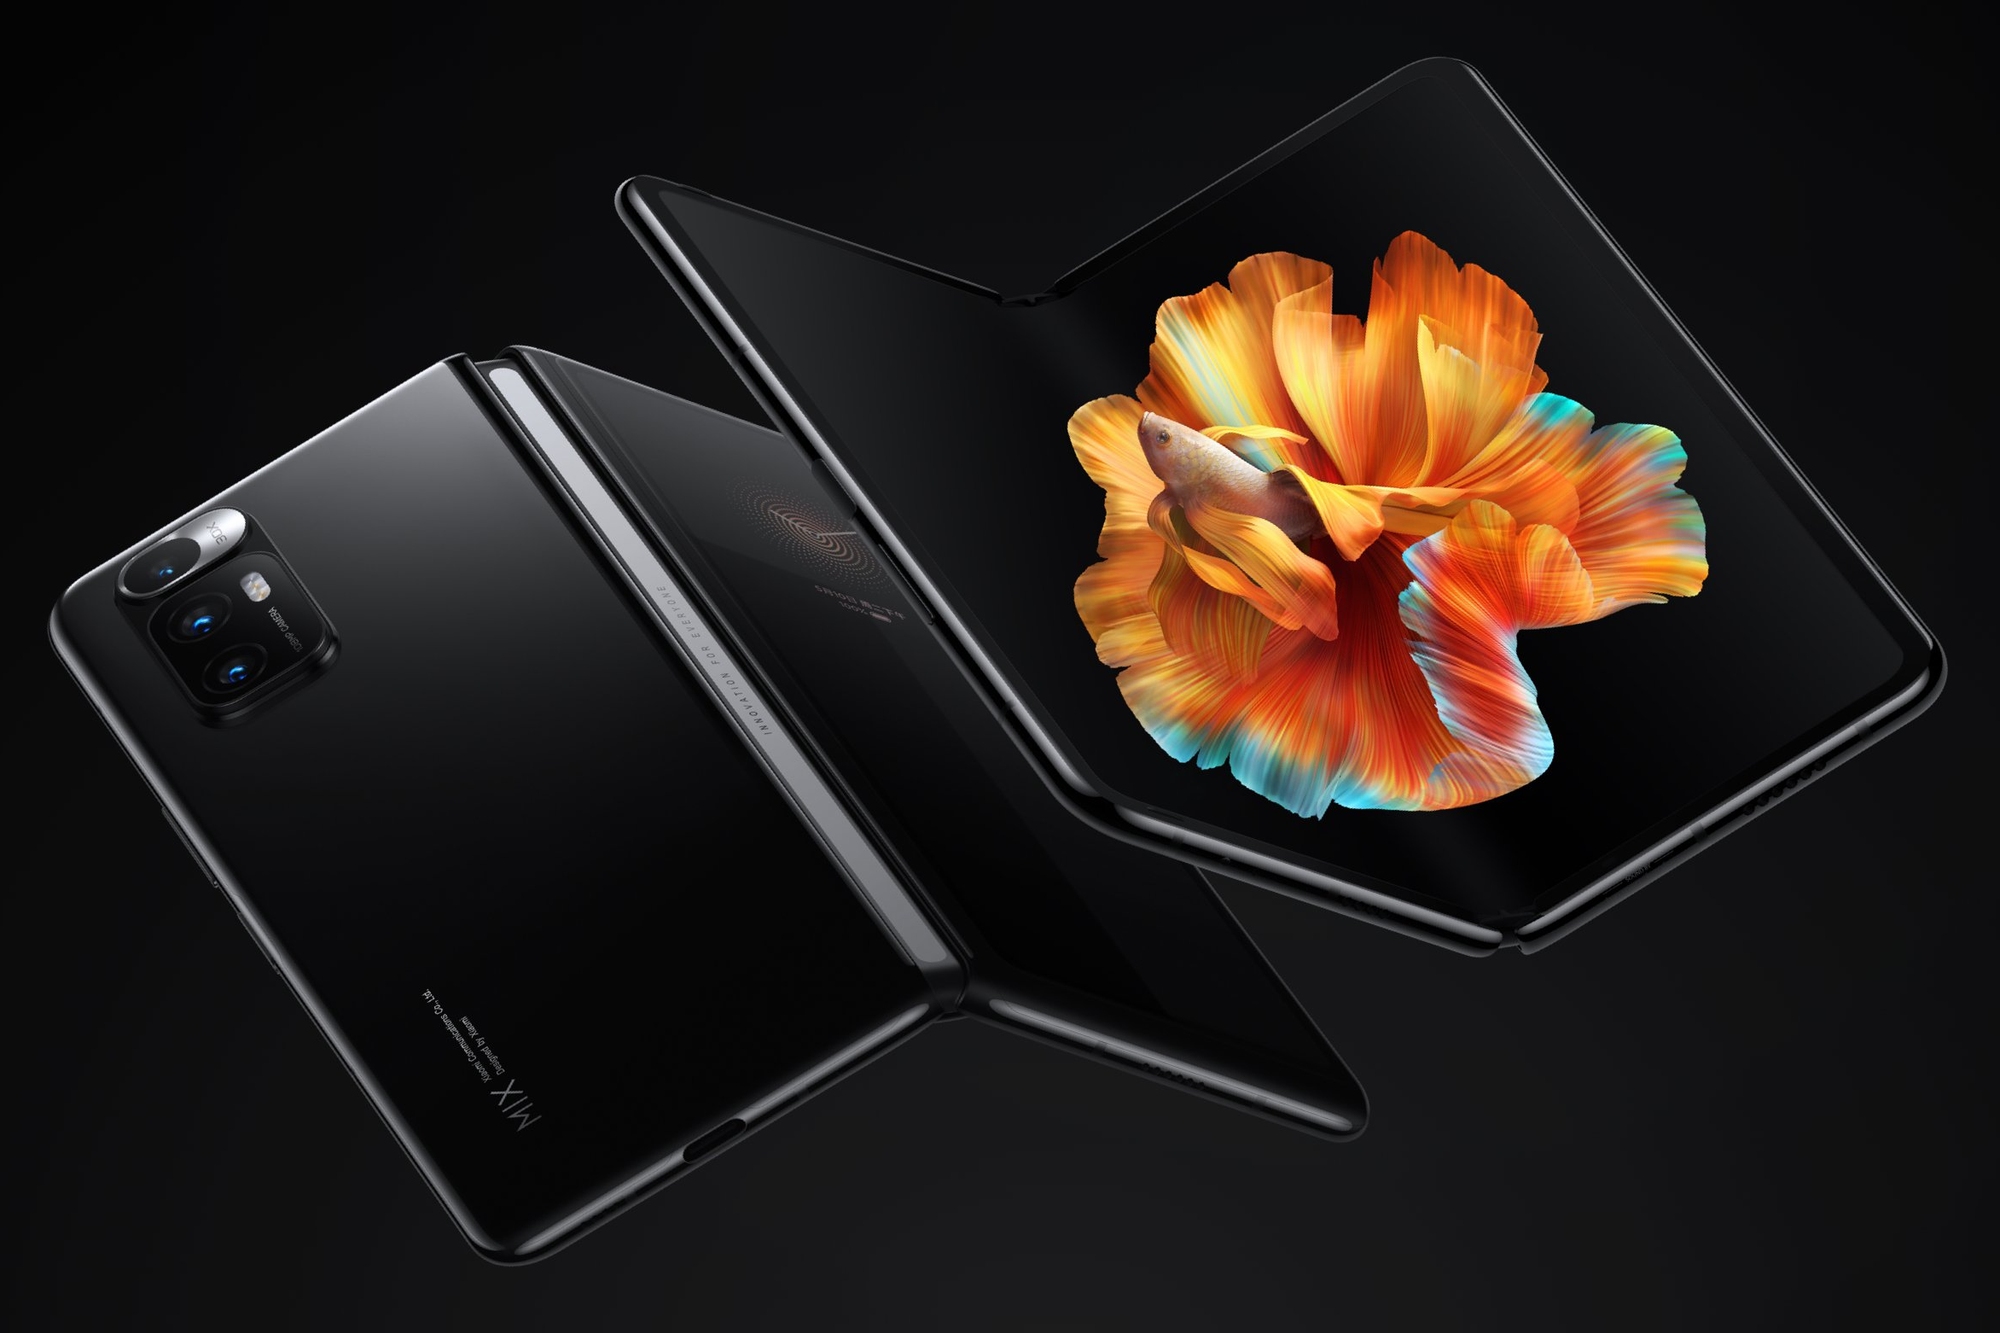 The next foldable smartphone Xiaomi Mi MIX Fold may be equipped with a sub-screen front camera